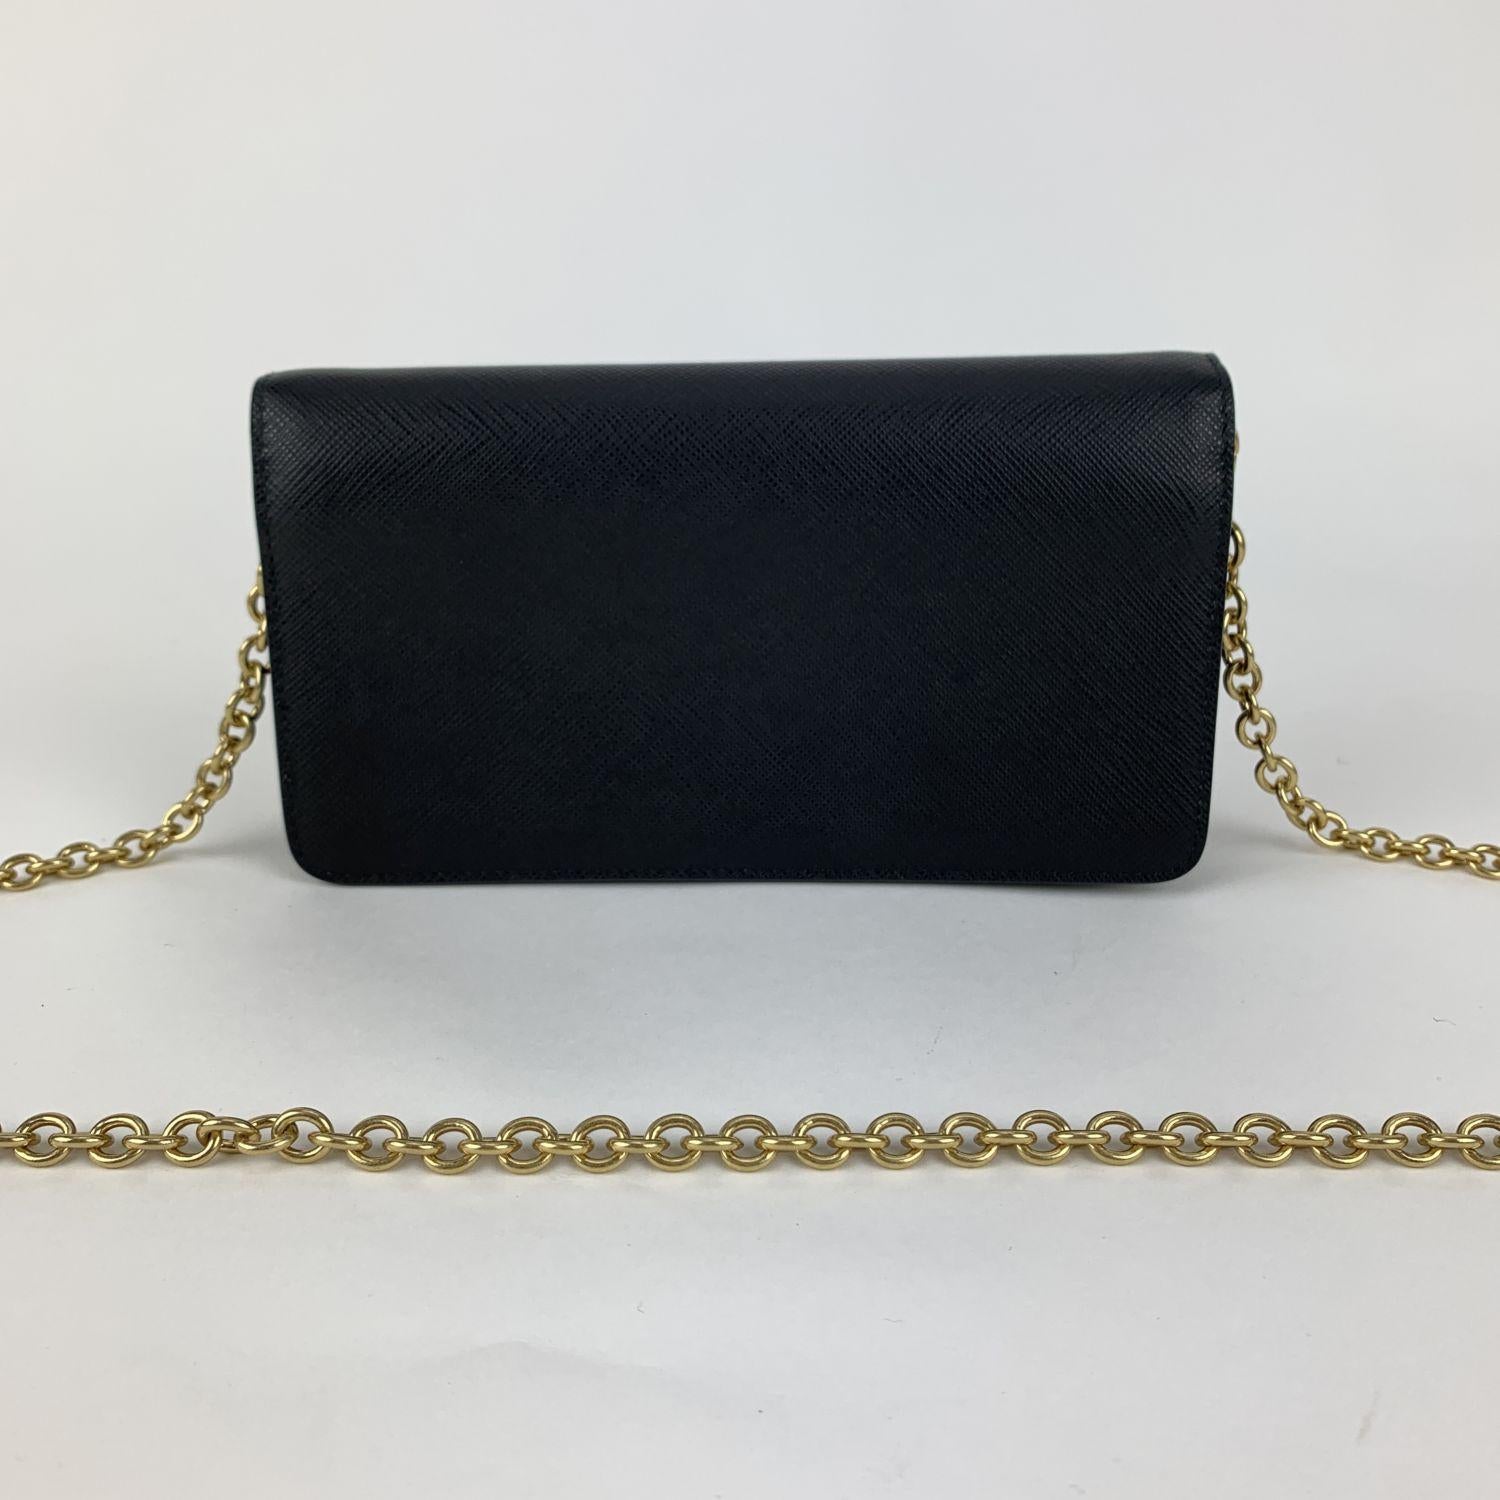 Women's Prada Black Saffiano Leather Continental Wallet on Chain 1DH029